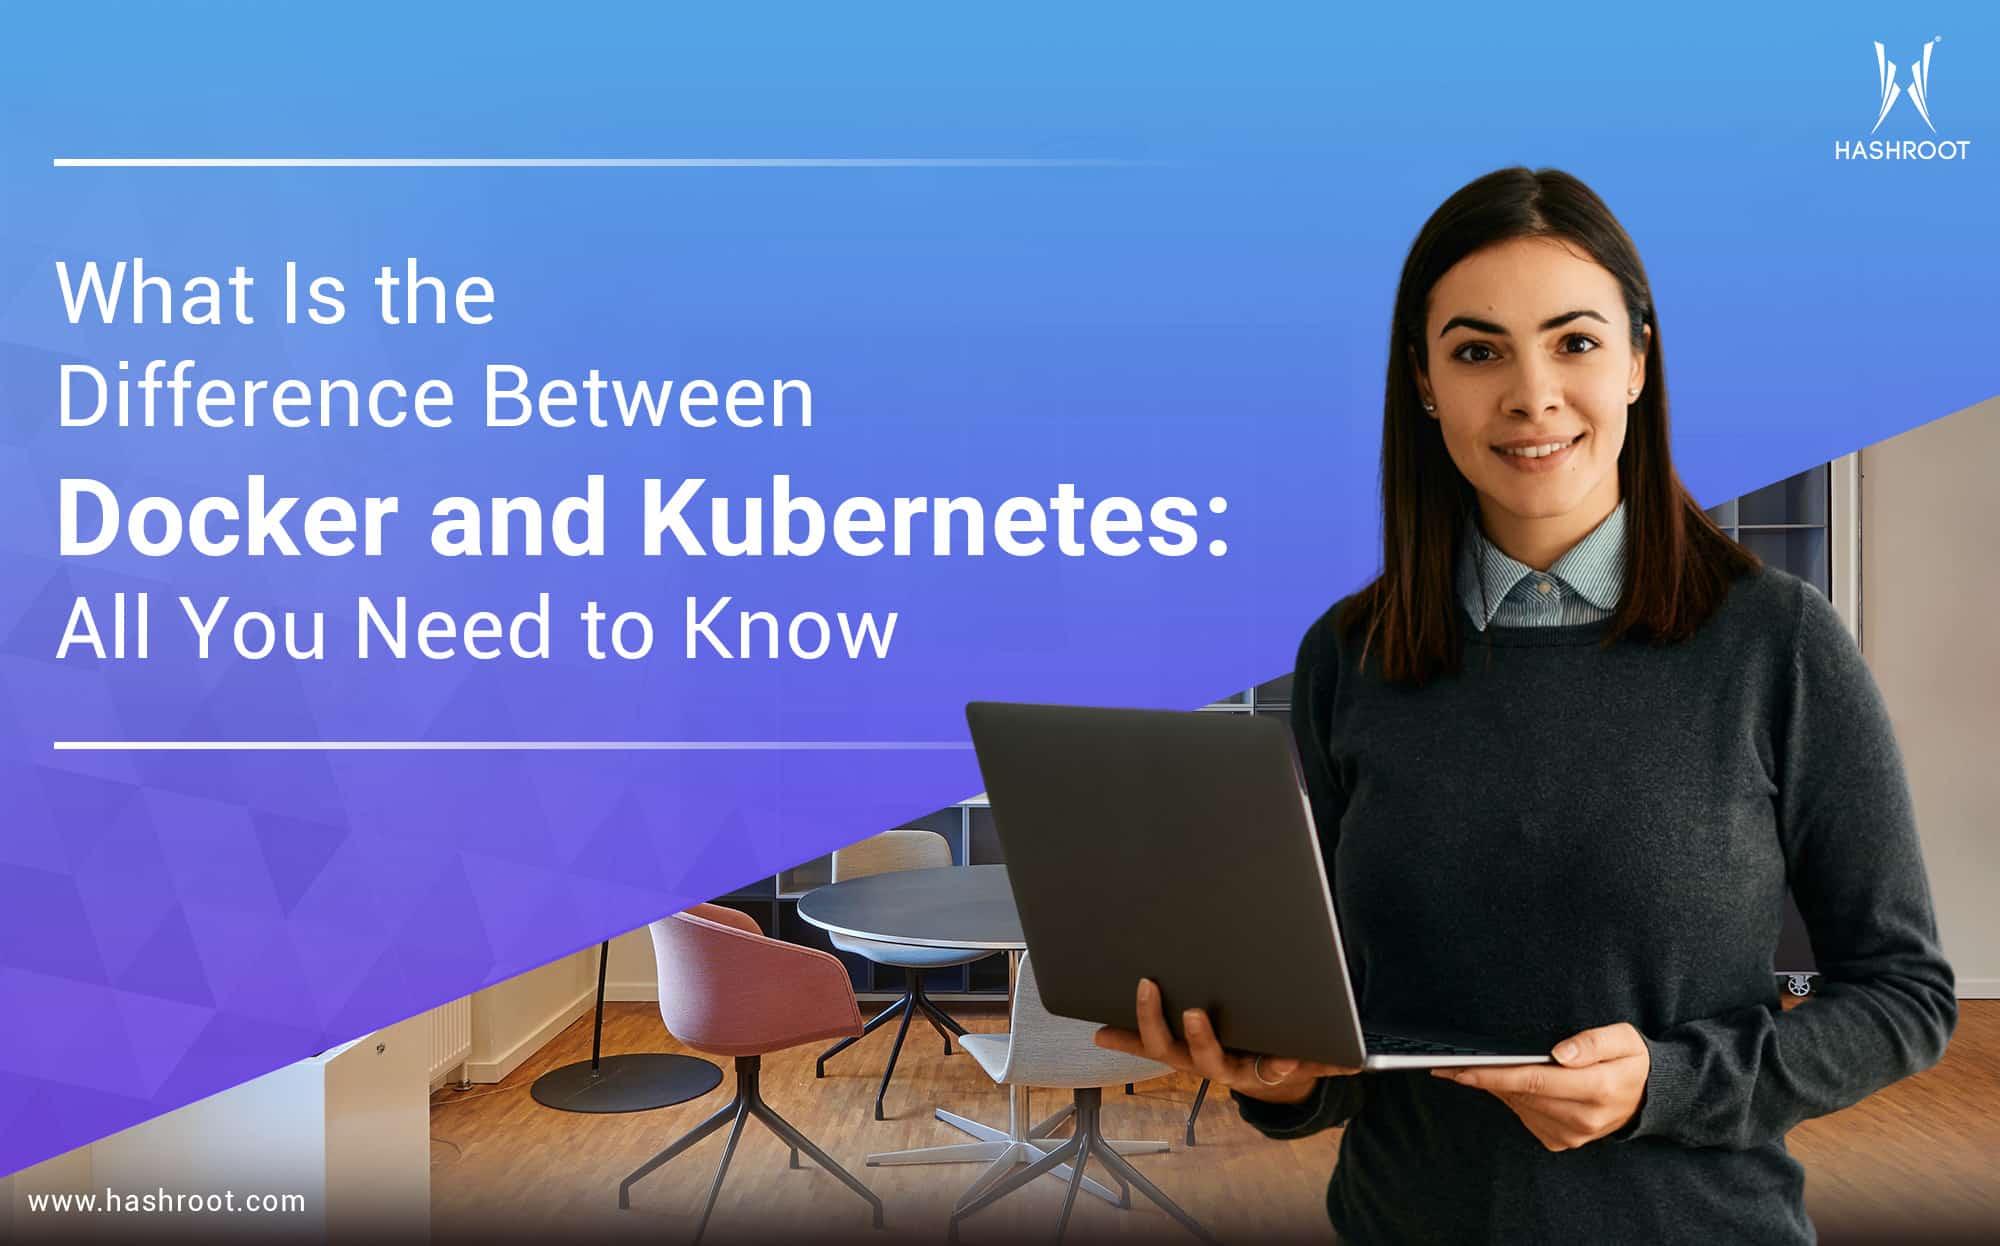 What Is the Difference Between Docker and Kubernetes: All You Need to Know